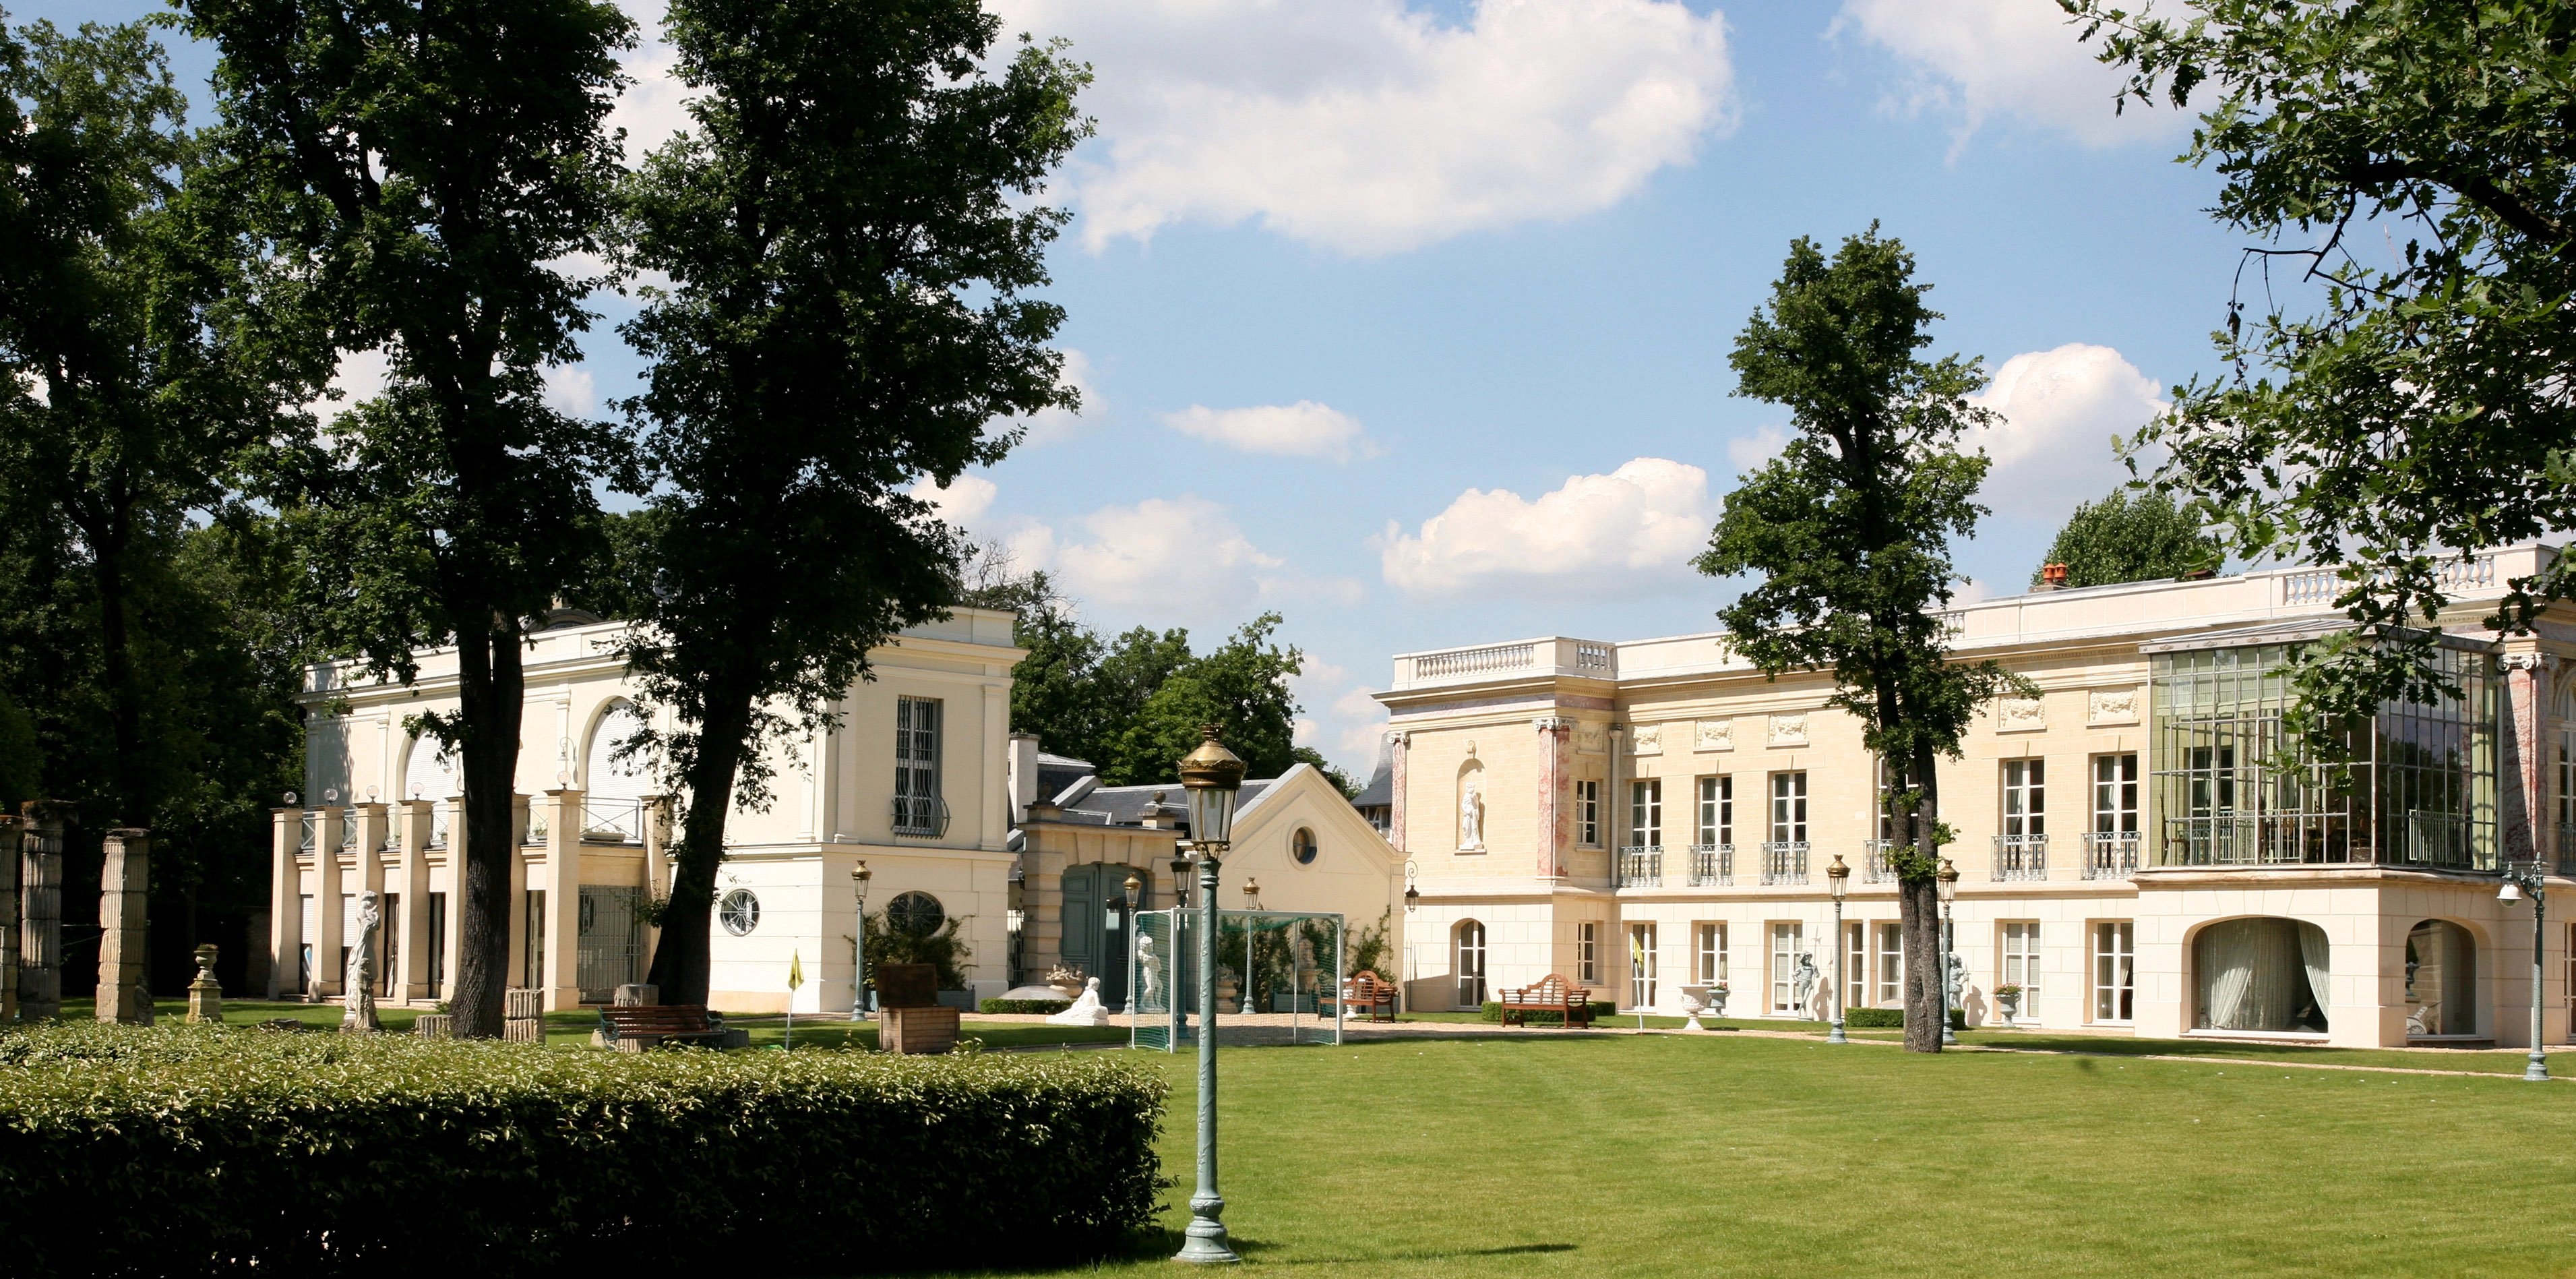 A sublime Palais inspired by Grand Trianon Palace, 20 min from Paris_1568